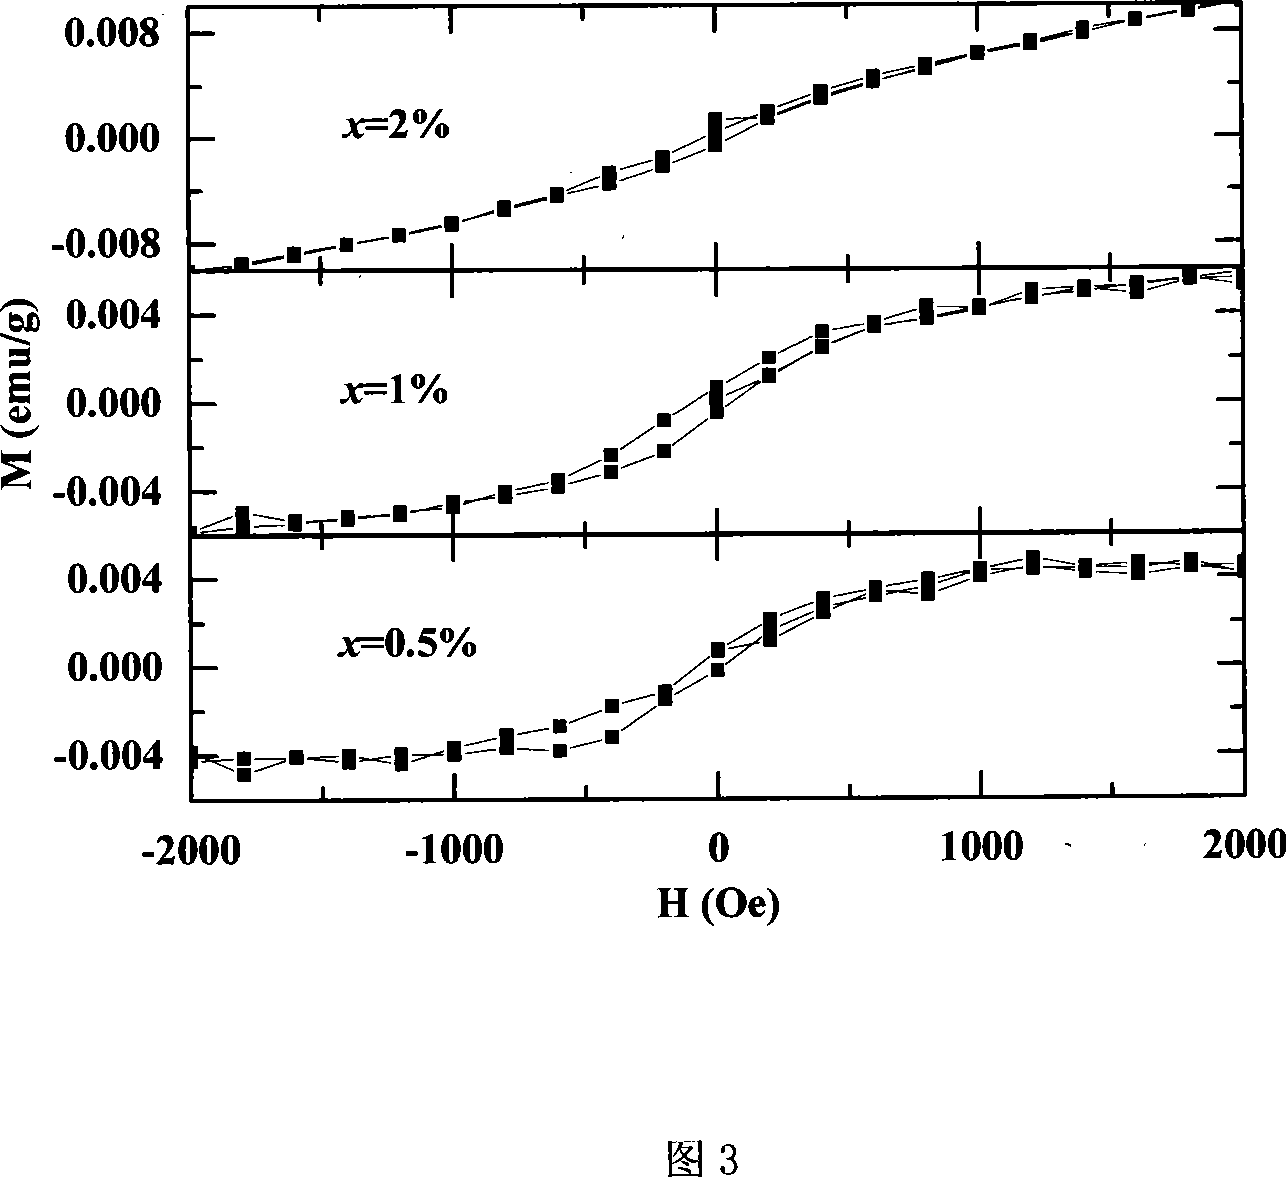 Method for preparing Fe doped ZnO room-temperature diluted magnetic semiconductor material